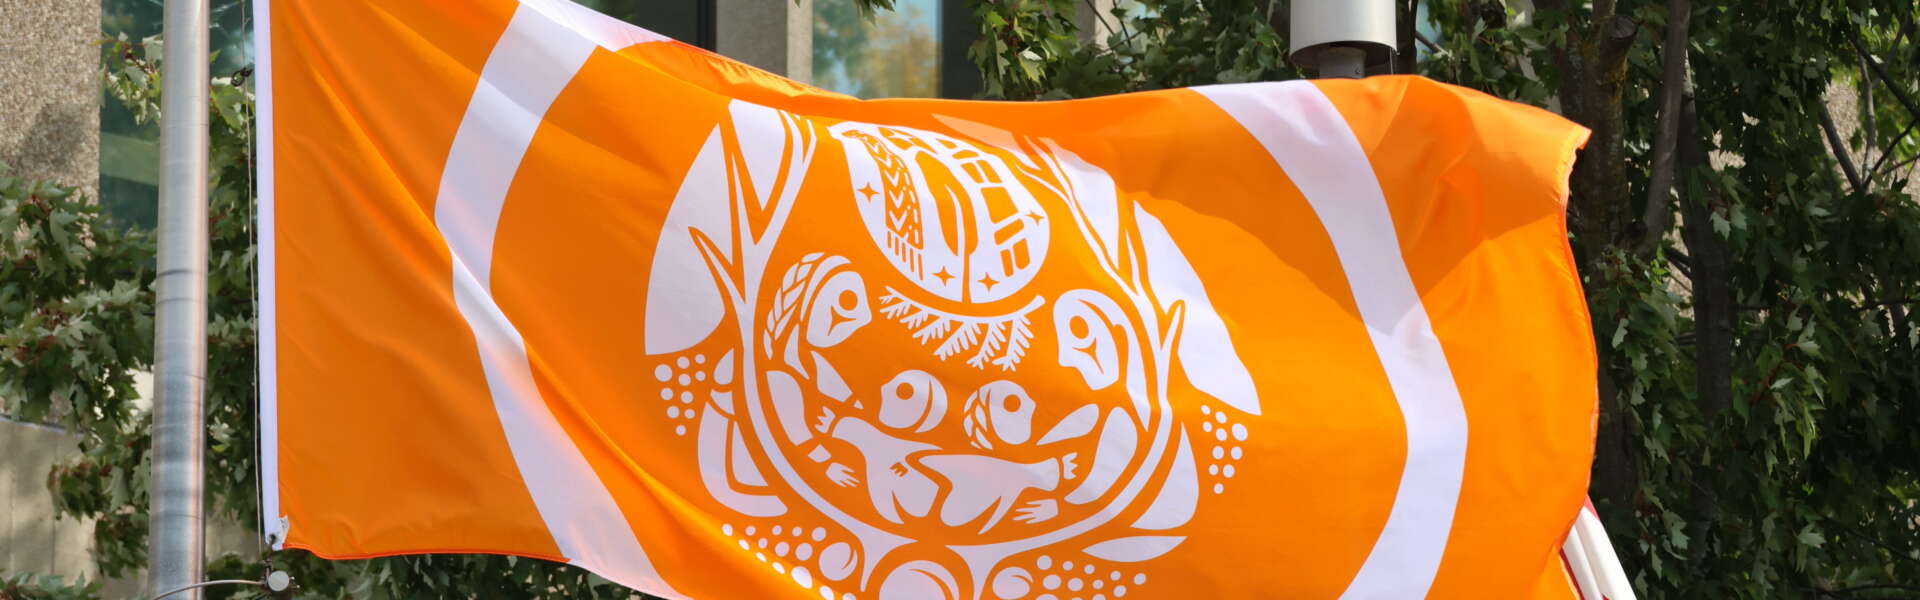 A closeup of an orange survivors flag portraying children reaching for adults